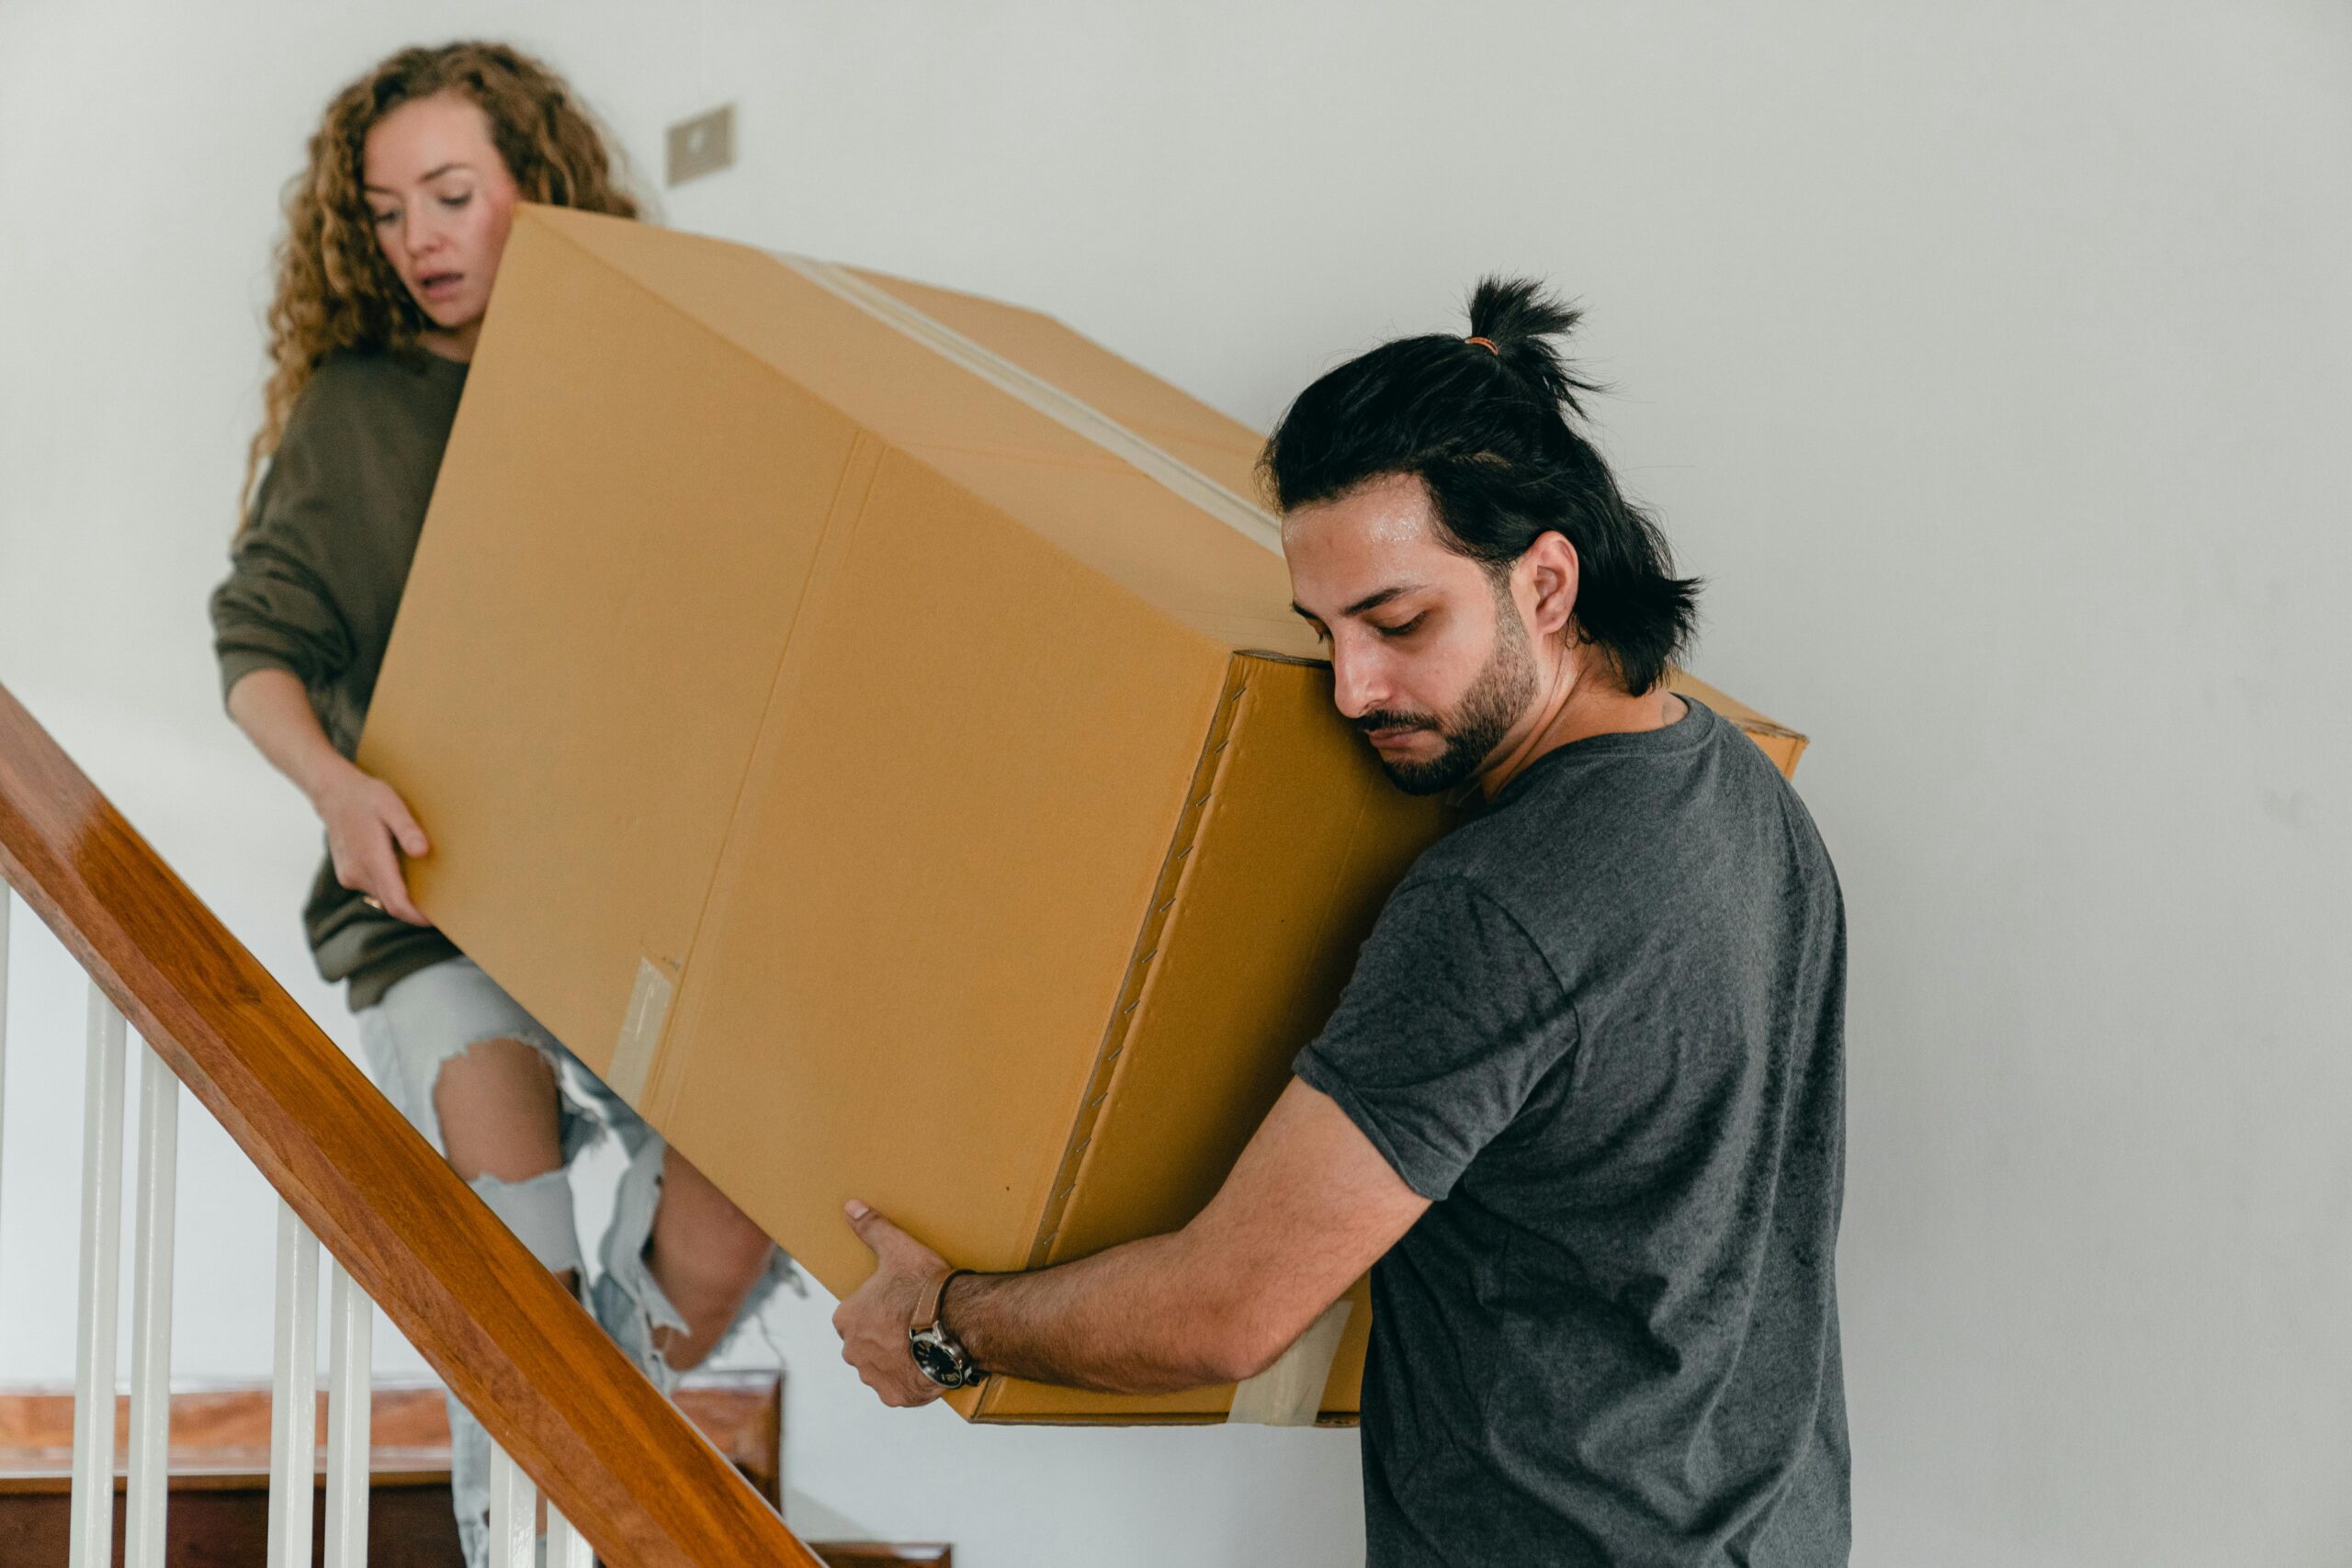 two people carrying a box down stairs